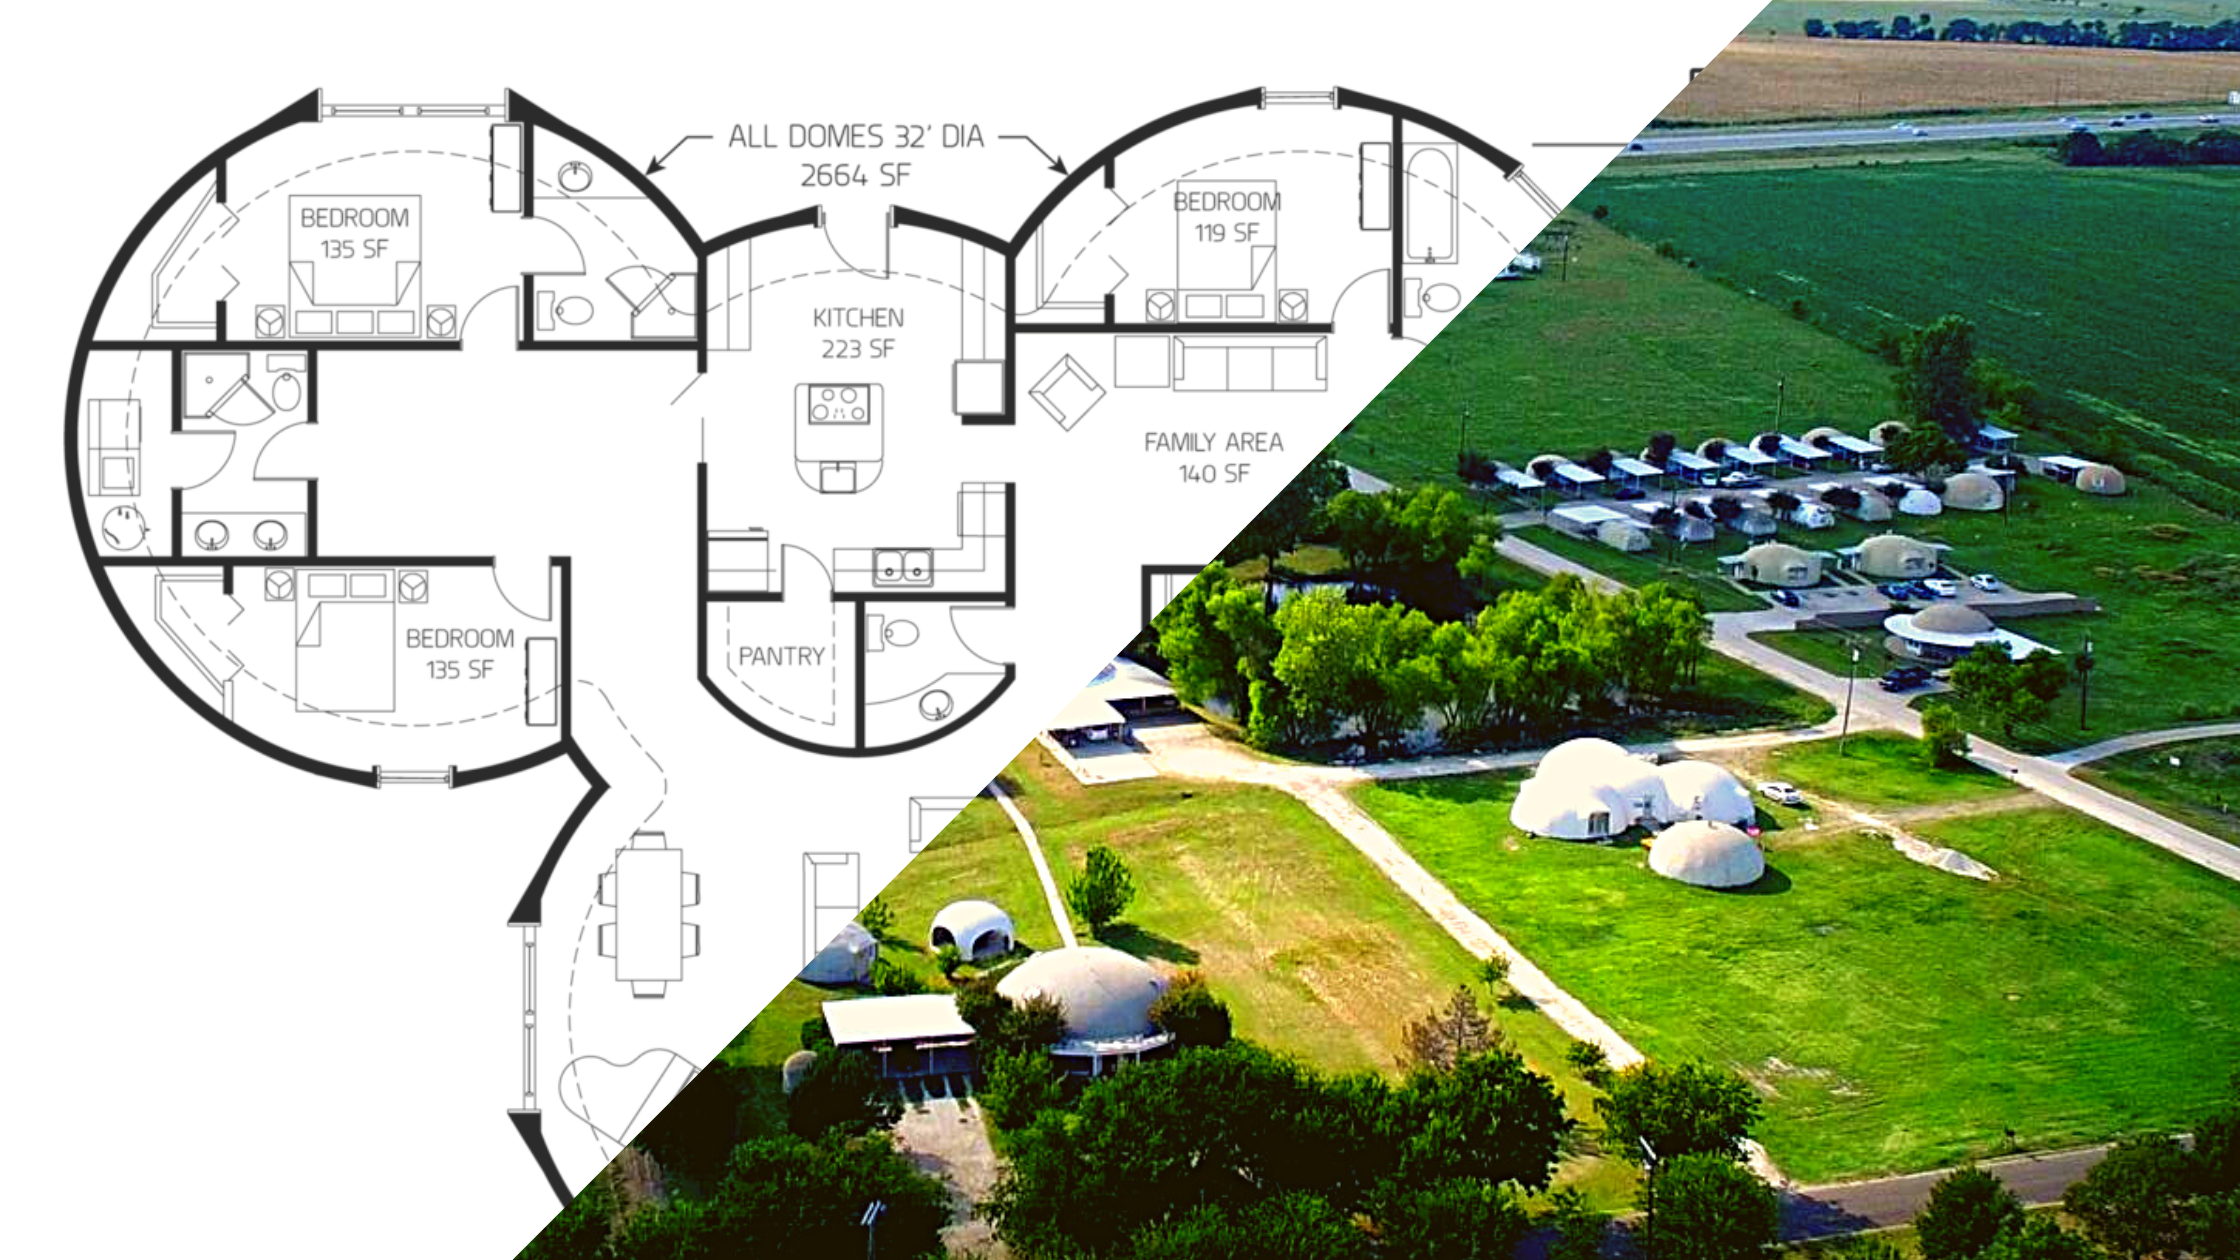 Europa Dome Home Floor Plan and Aerial Photo of a Europa Home in Italy, Texas